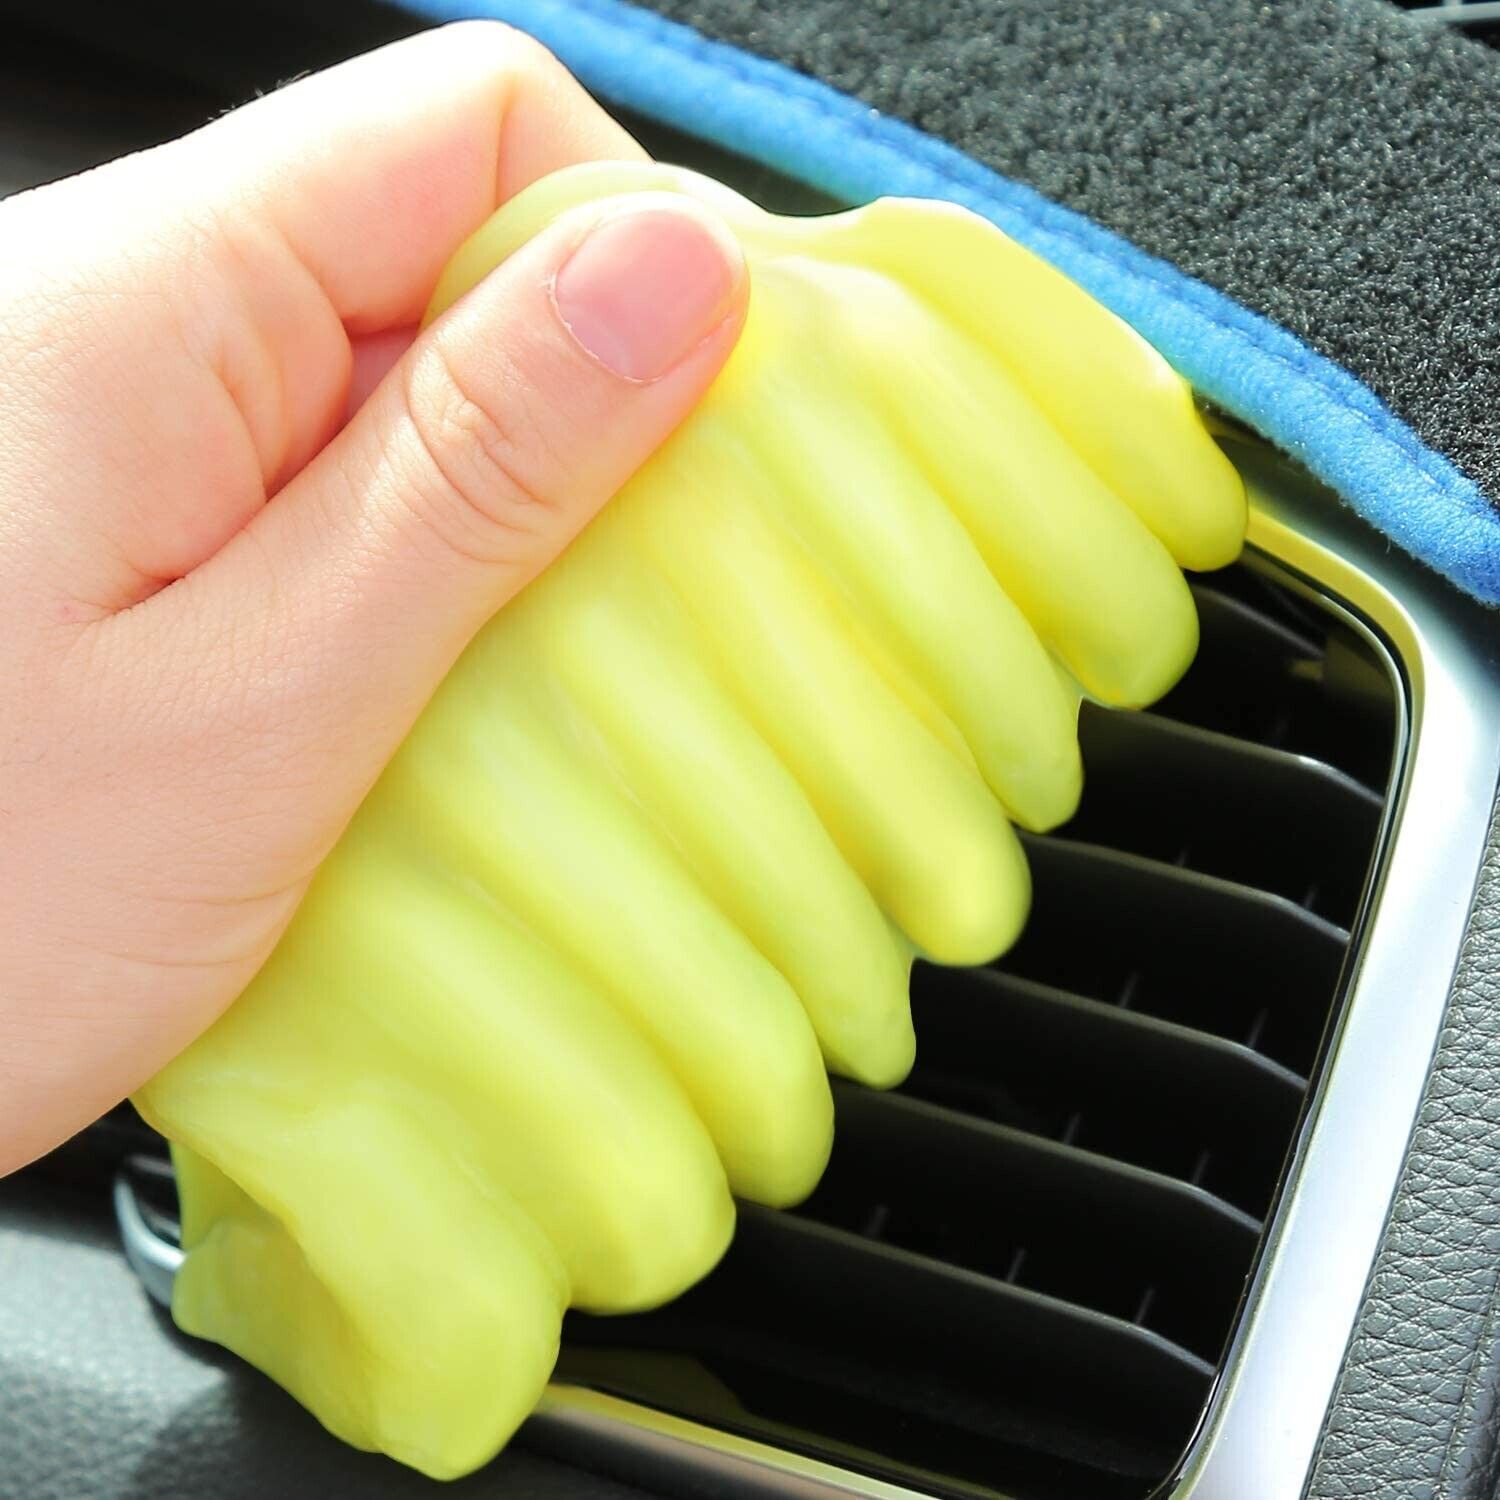 70g 1Pcs Car Cleaning Gel Car Detailing Putty Vent Cleaner Cleaning Putty Gel